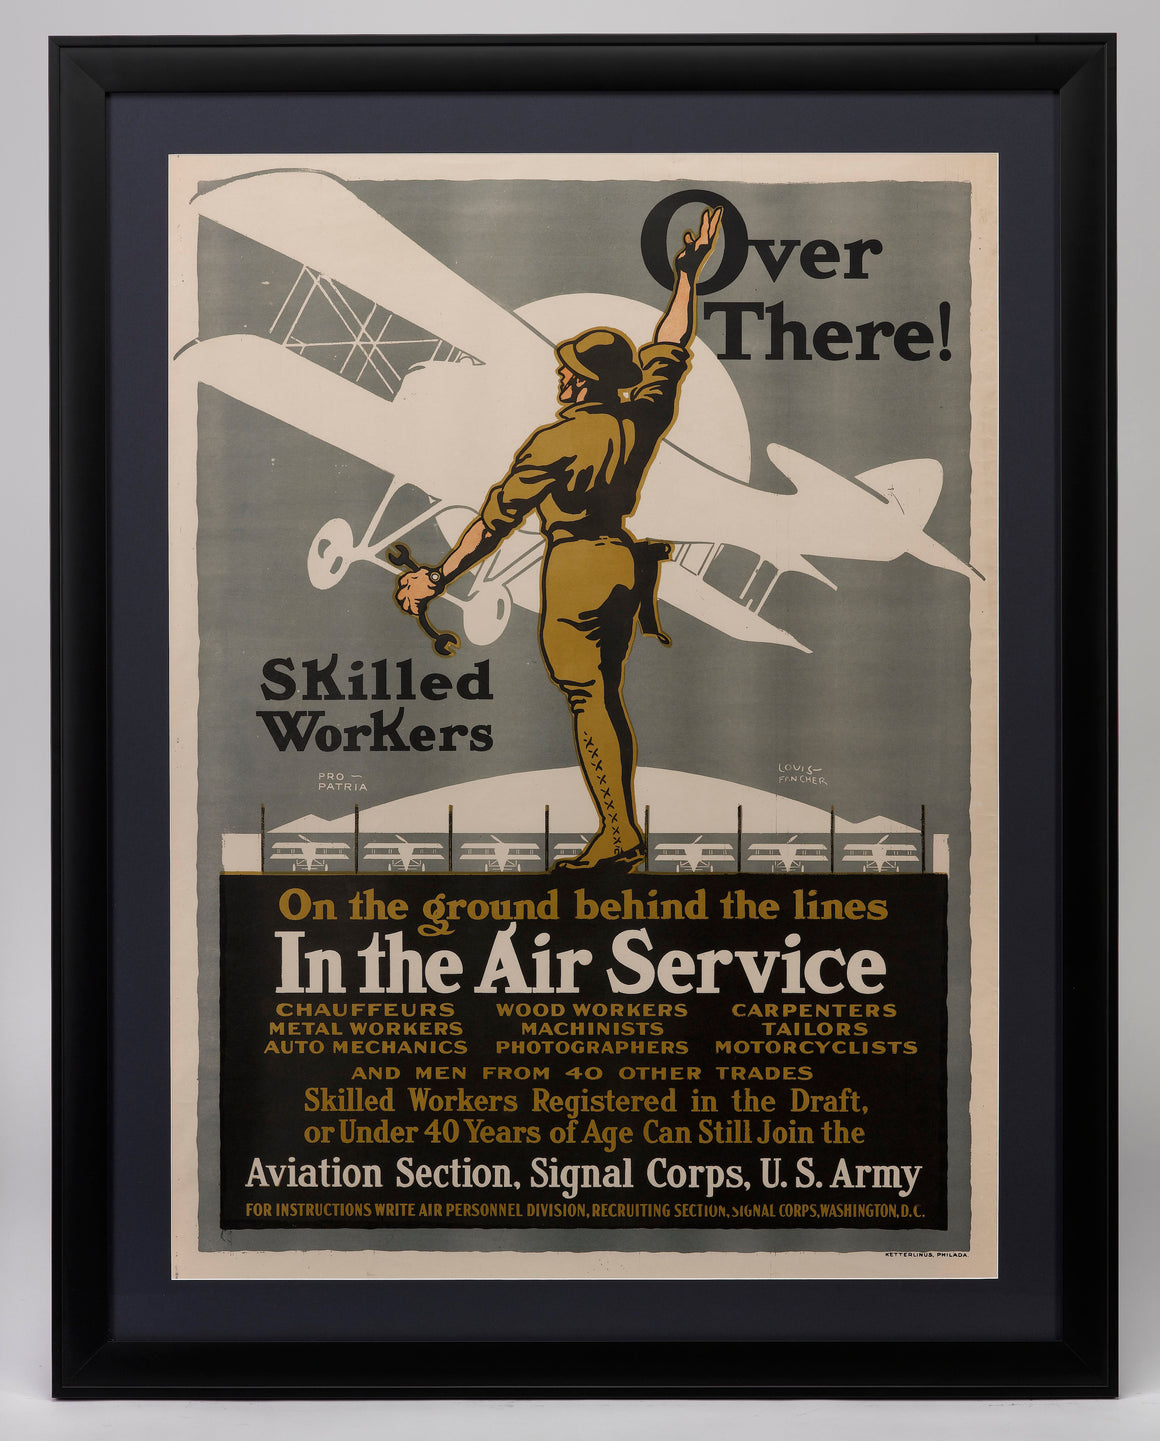 "Over There! / In the Air Service" Vintage WWI U.S. Army Signal Corps Recruitment Poster by Louis Fancher, 1918